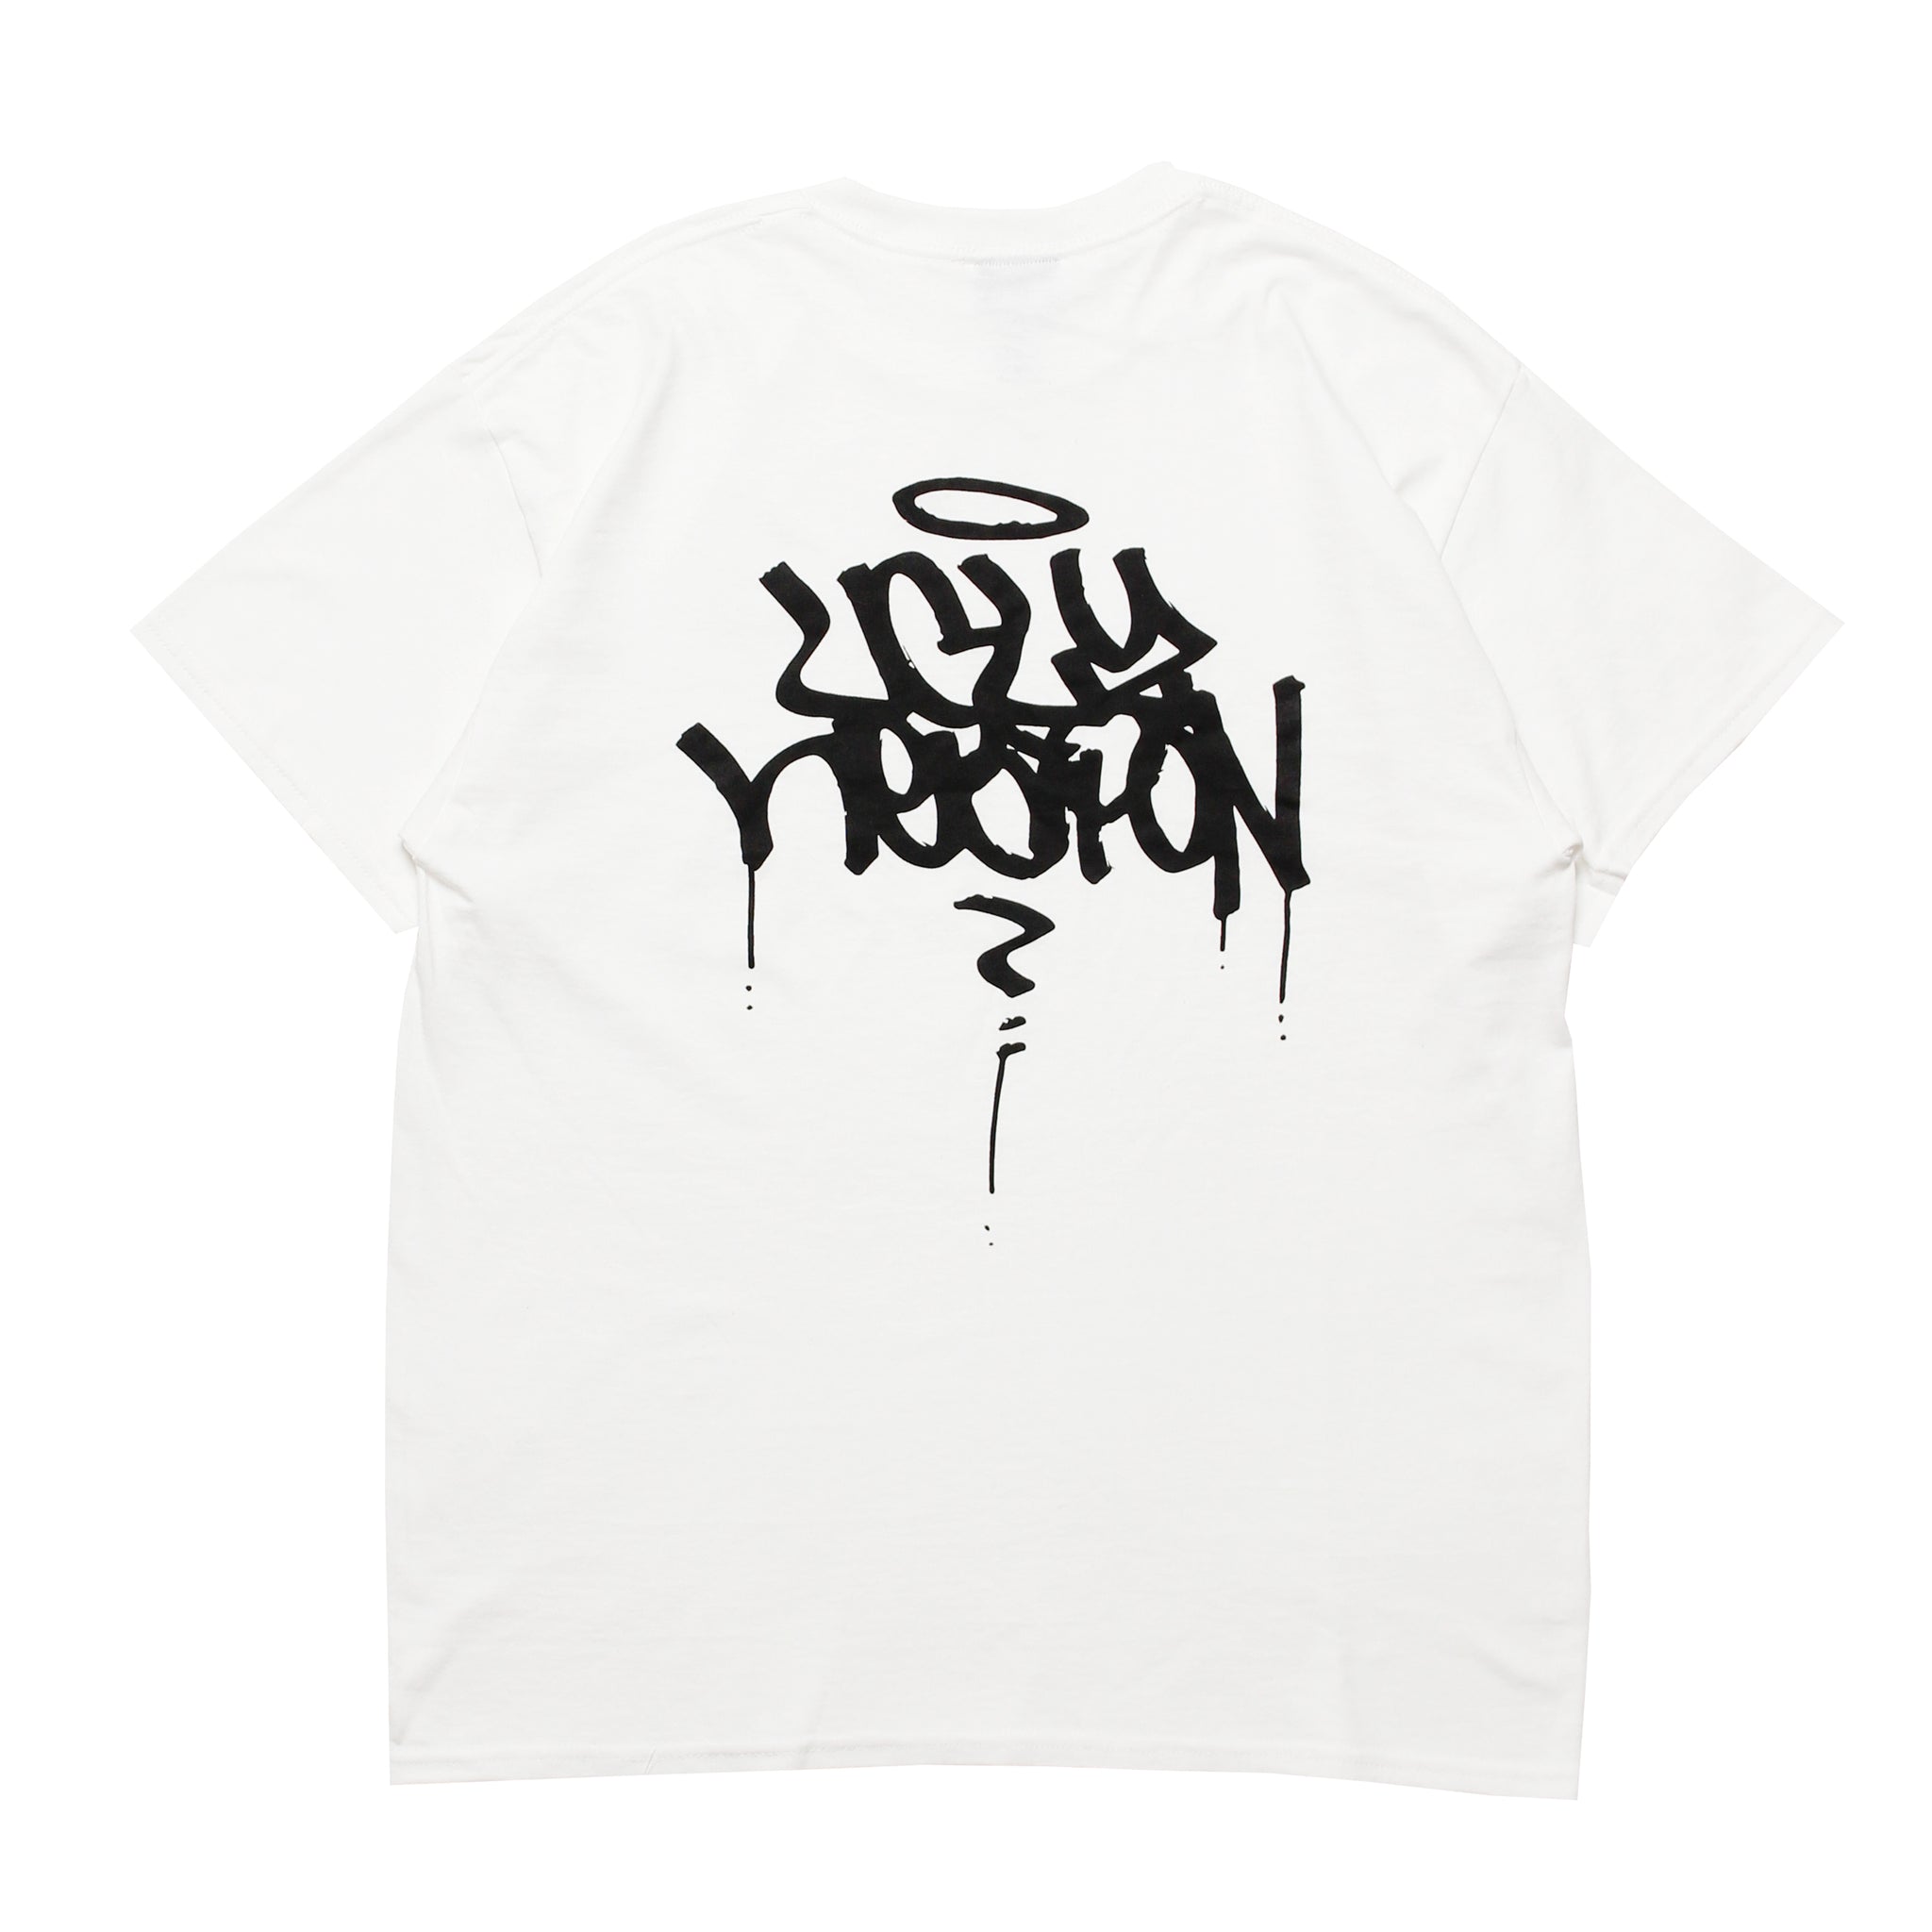 UGLY WEAPON - Tagging Tee "White"